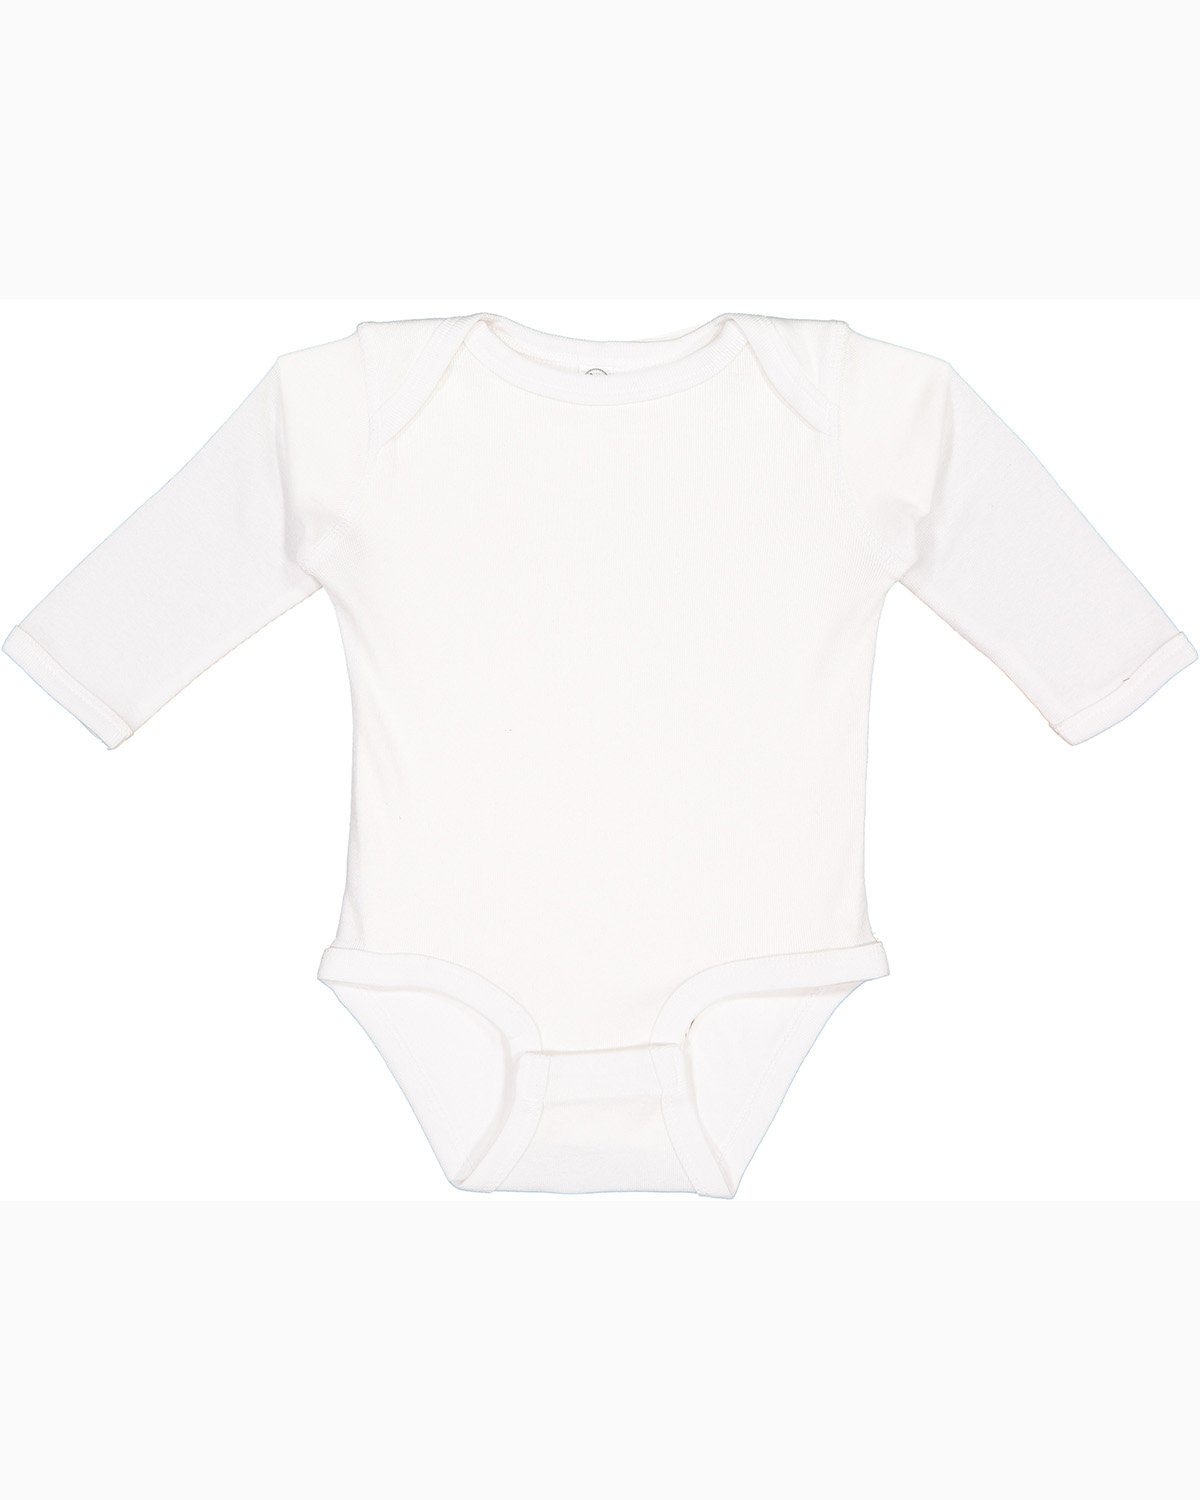 Front view of Infant Long-Sleeve Bodysuit